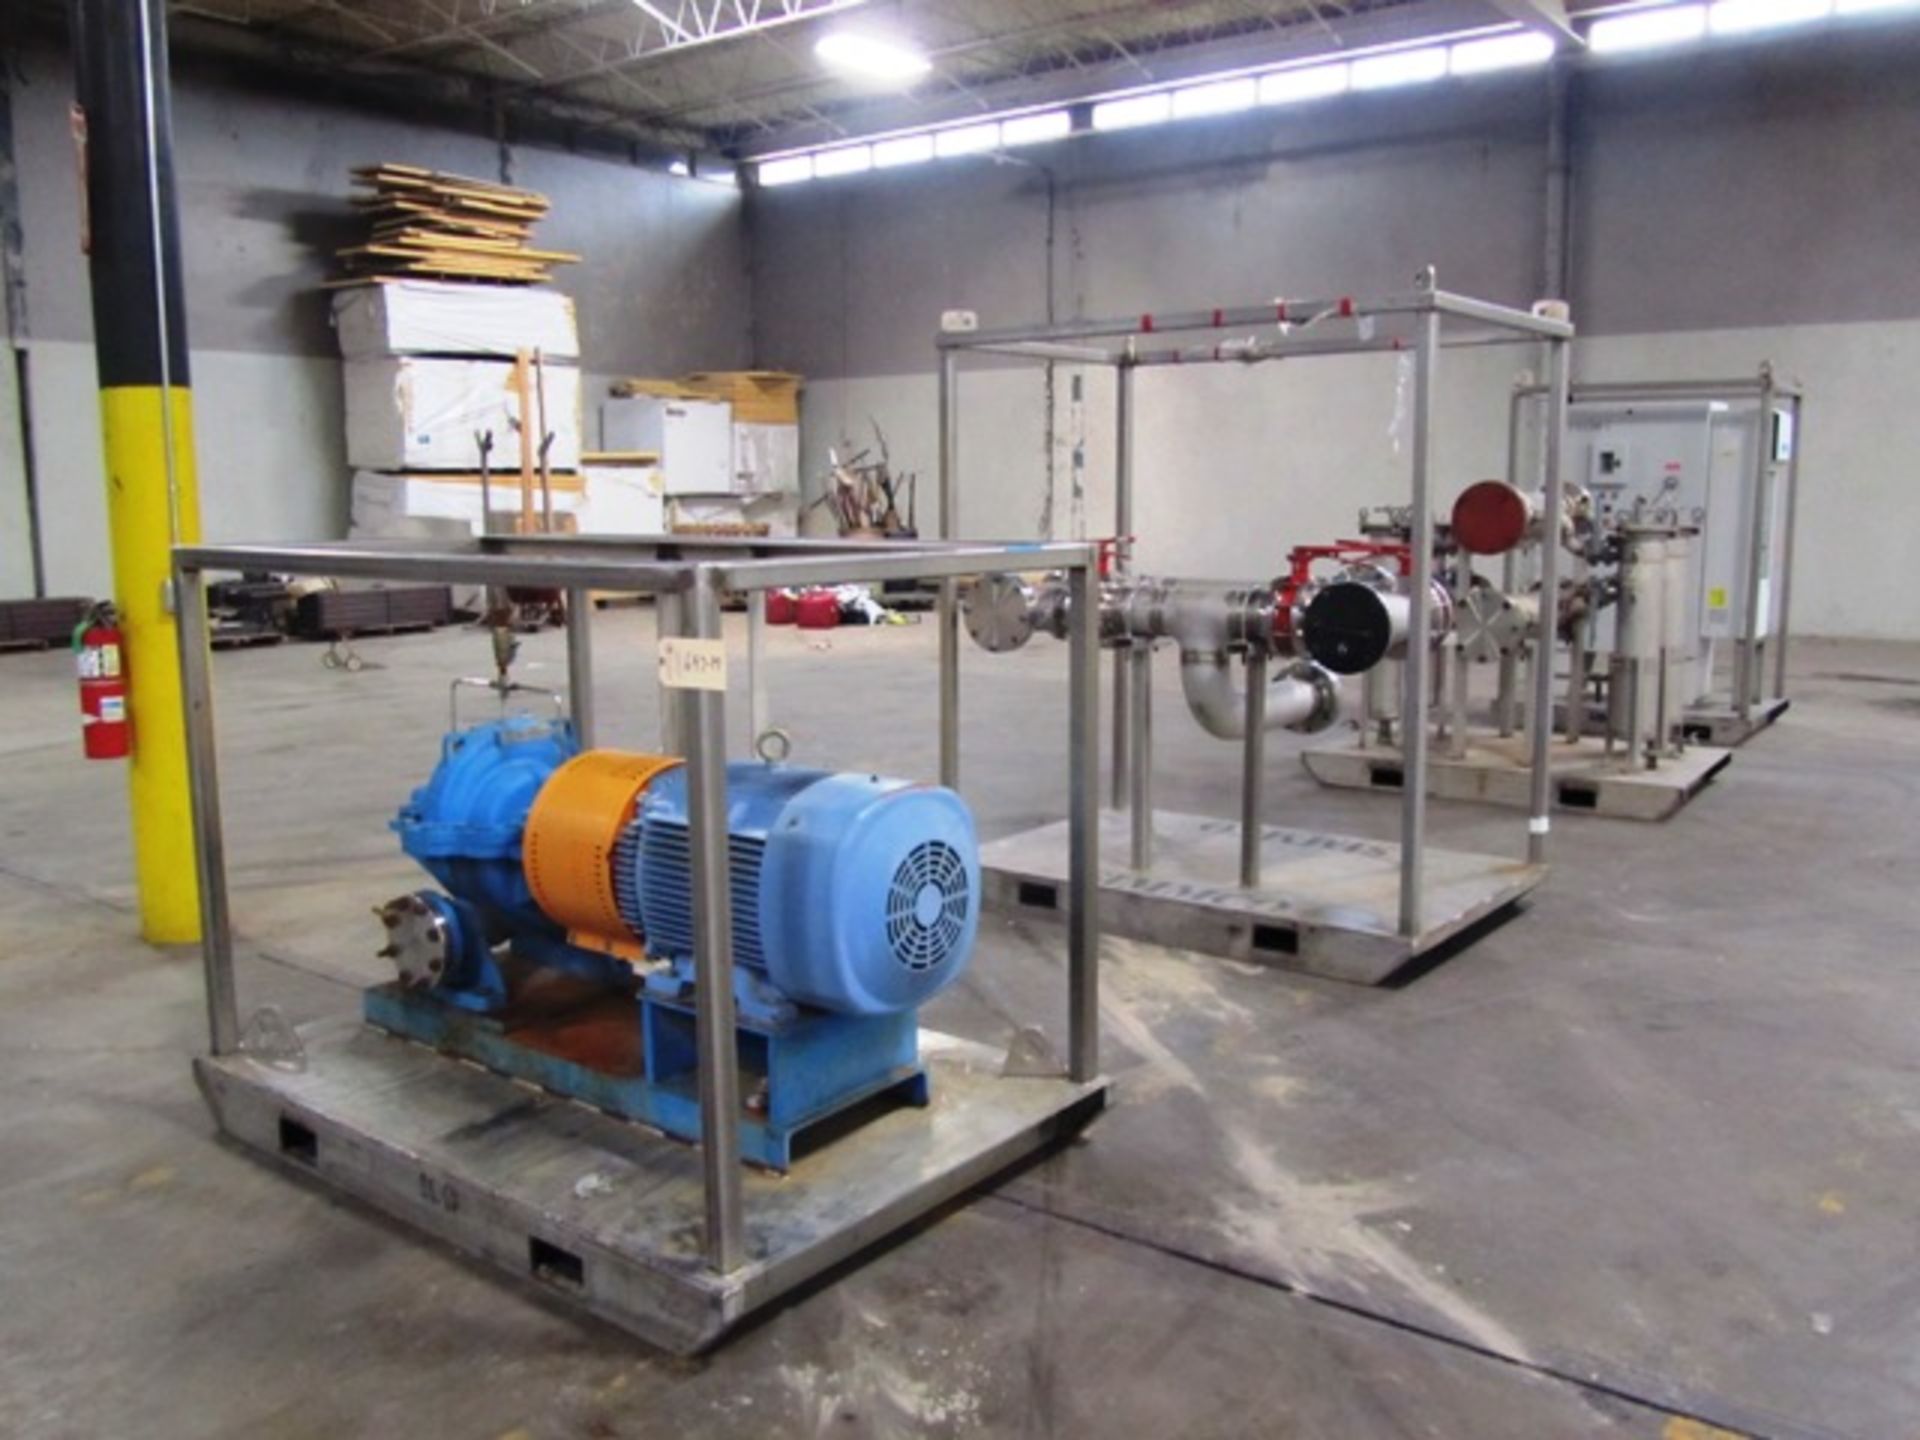 Oil / Water Bypass Pumping System consisting of 75 HP Motor, (2) Splitter Valve Units, Pfannenberg